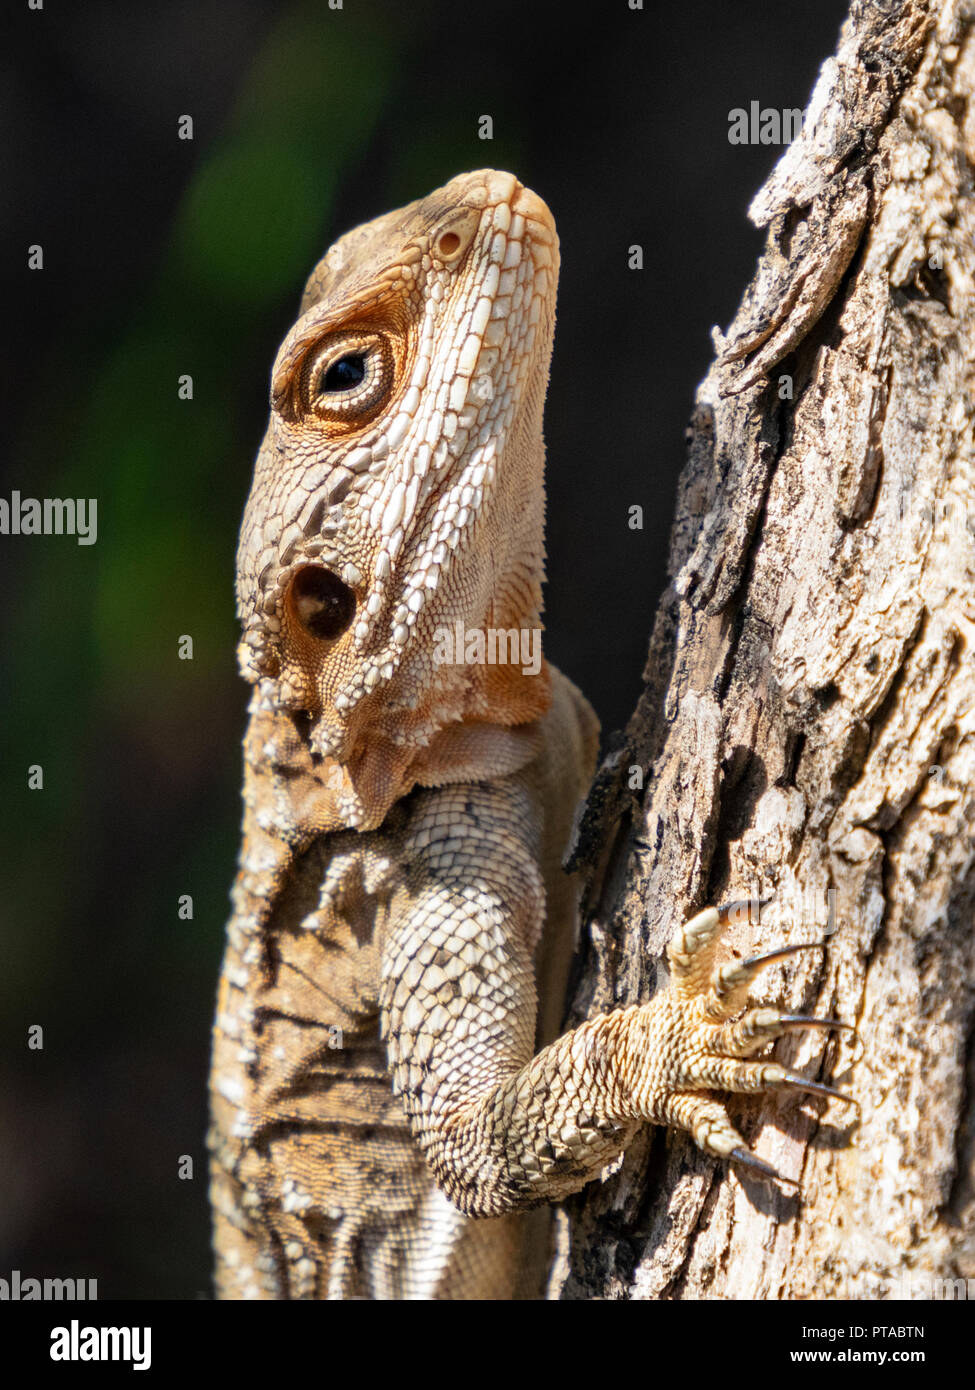 a roughtail rock agama lizard climbing a tree with deeply textured bark on a dark green background Stock Photo